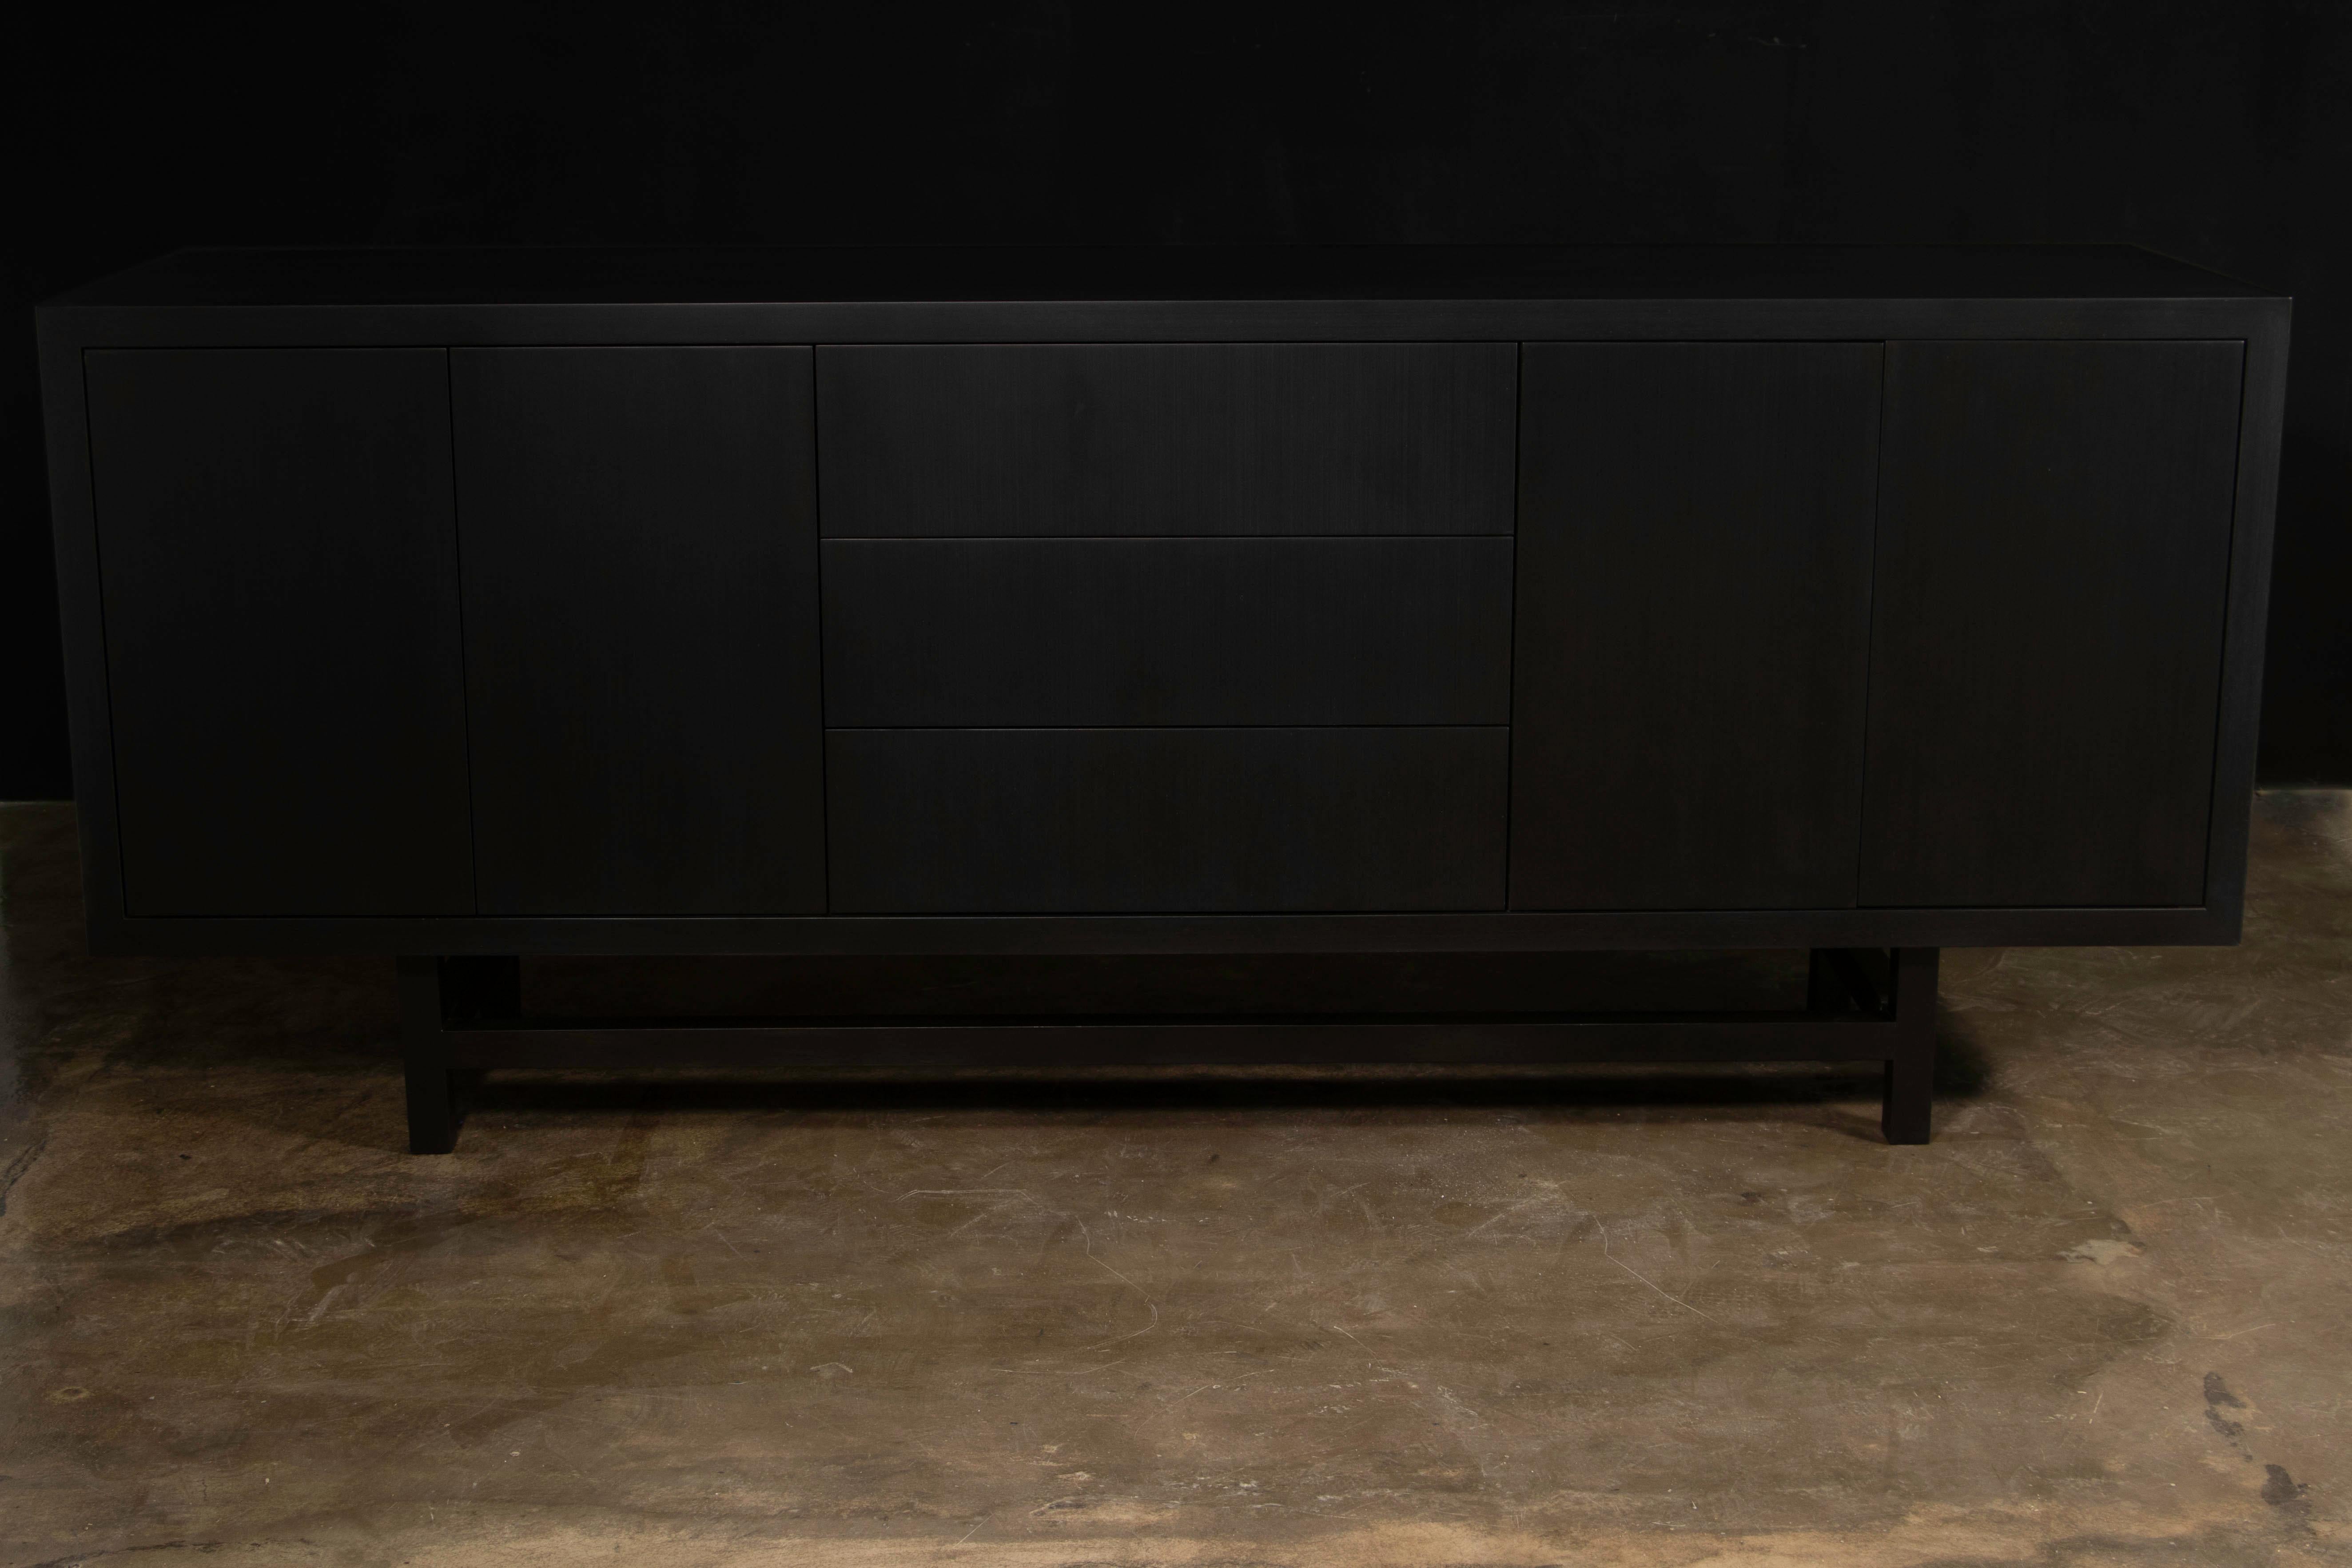 Salvatore Ebony Modern Minimal Credenza with Drawers and Doors from Costantini

The Salvatore Credenza can be made in any size, with any combination of drawers and doors. Shown here in Ebony but available in any material or finish and any